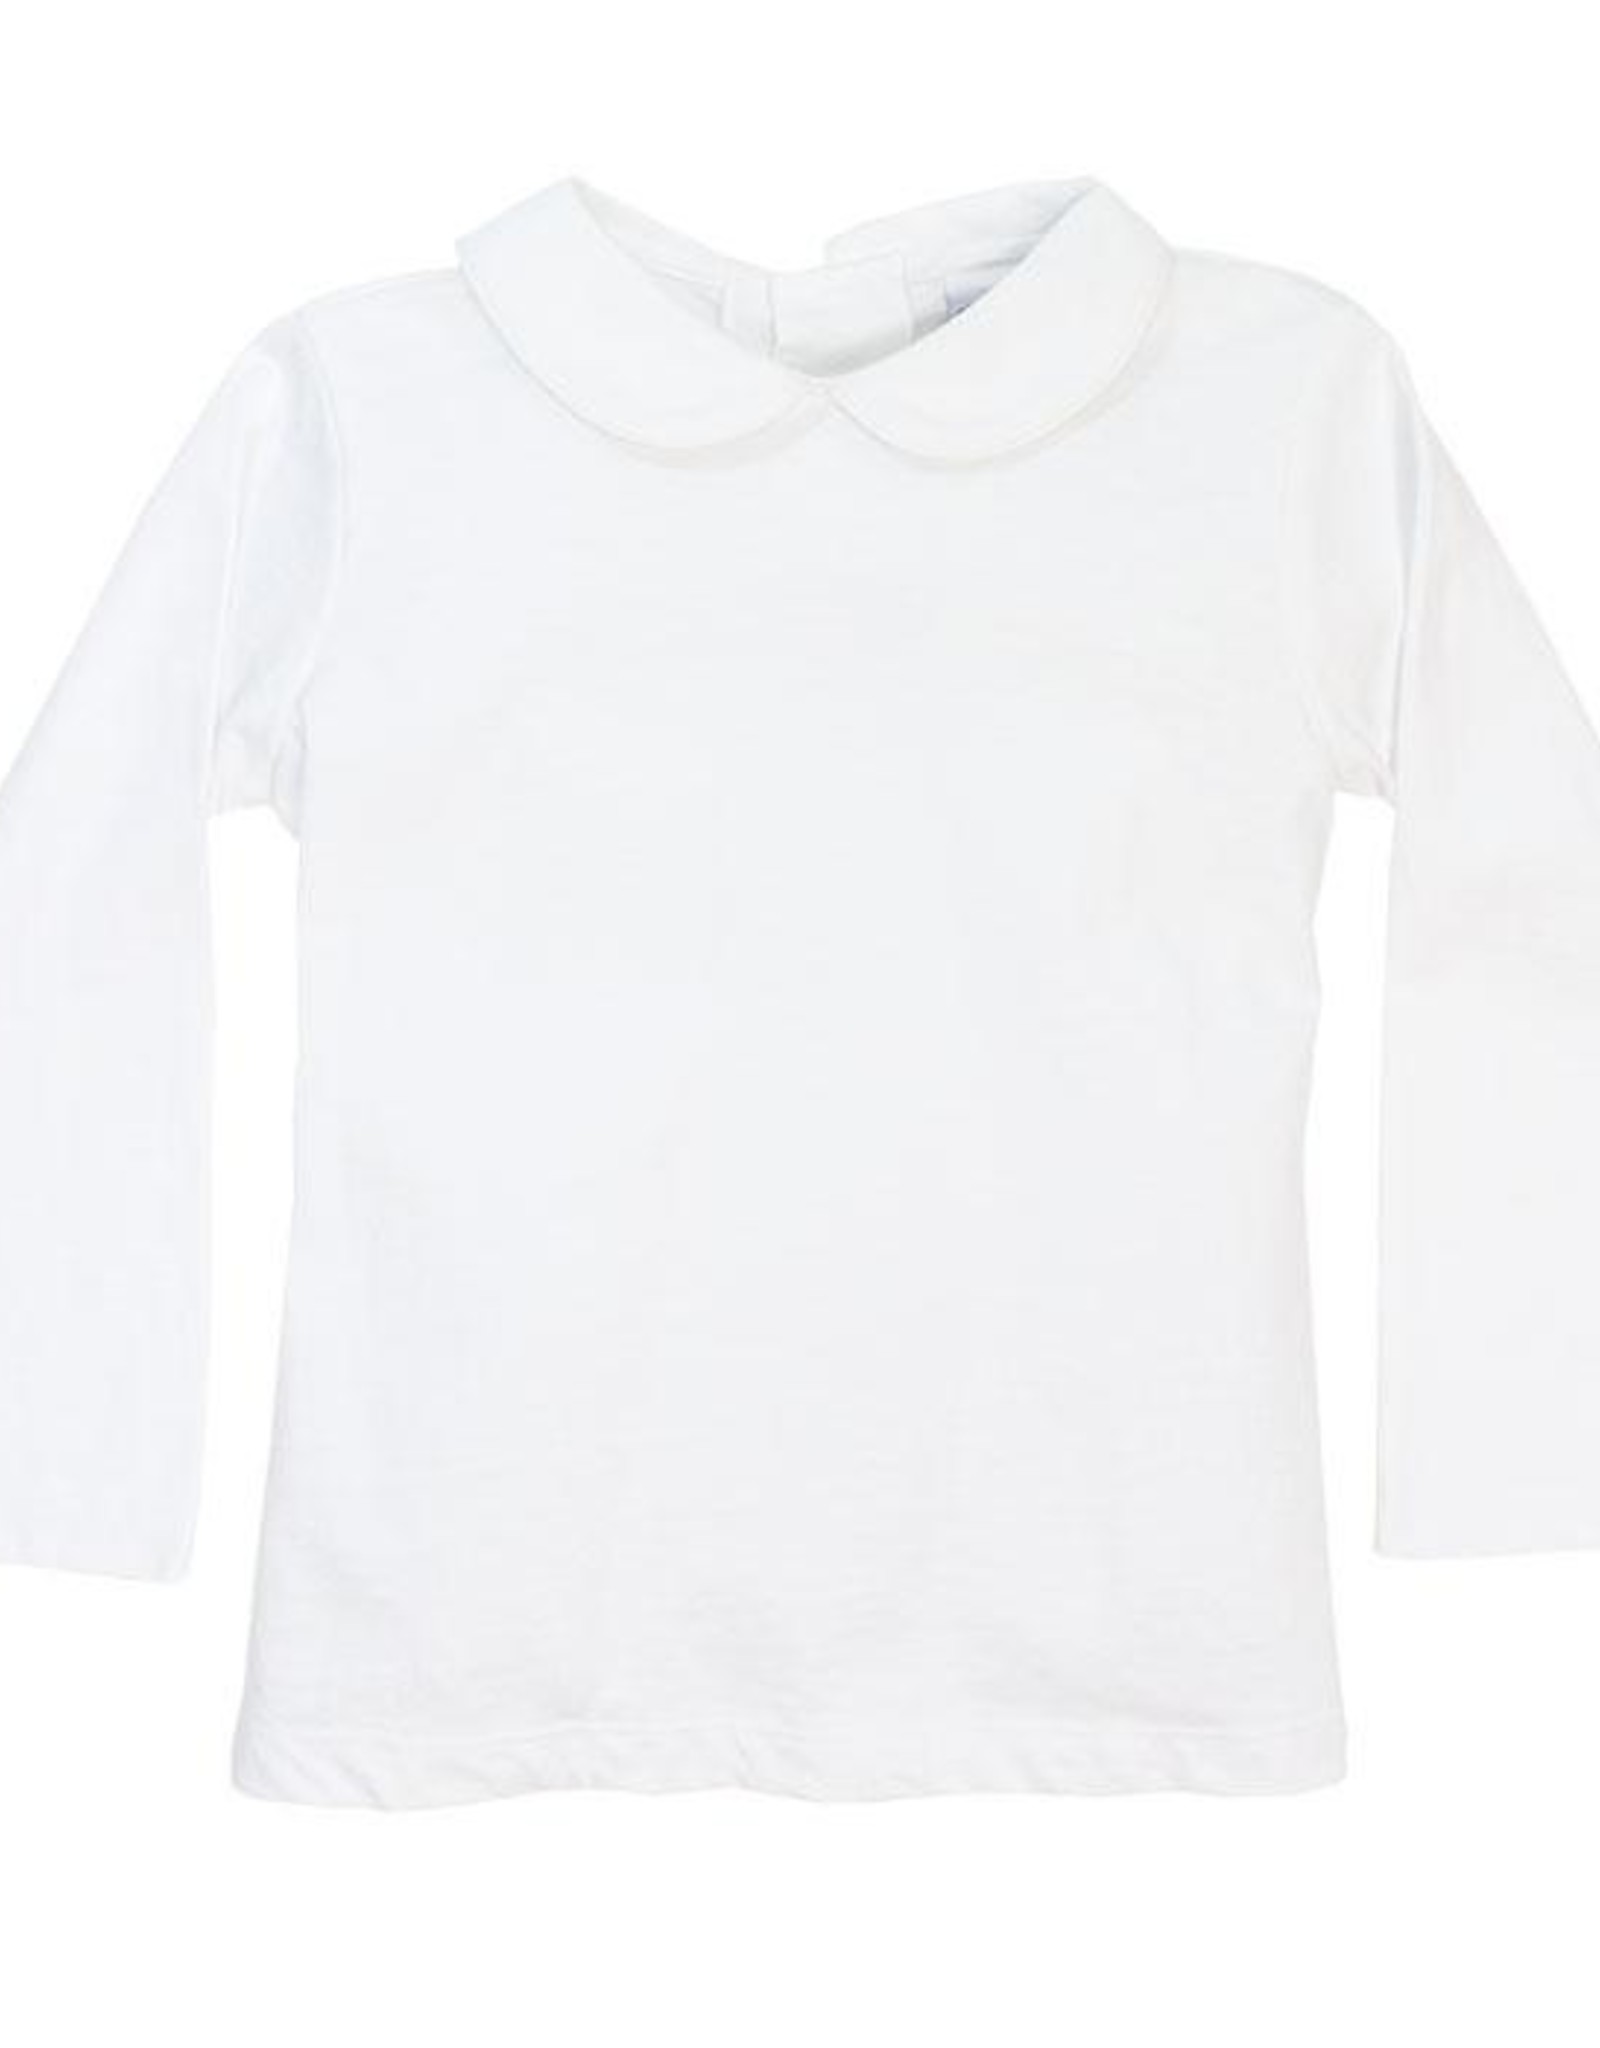 The Bailey Boys White Knit Unisex Long Sleeve Piped Shirt